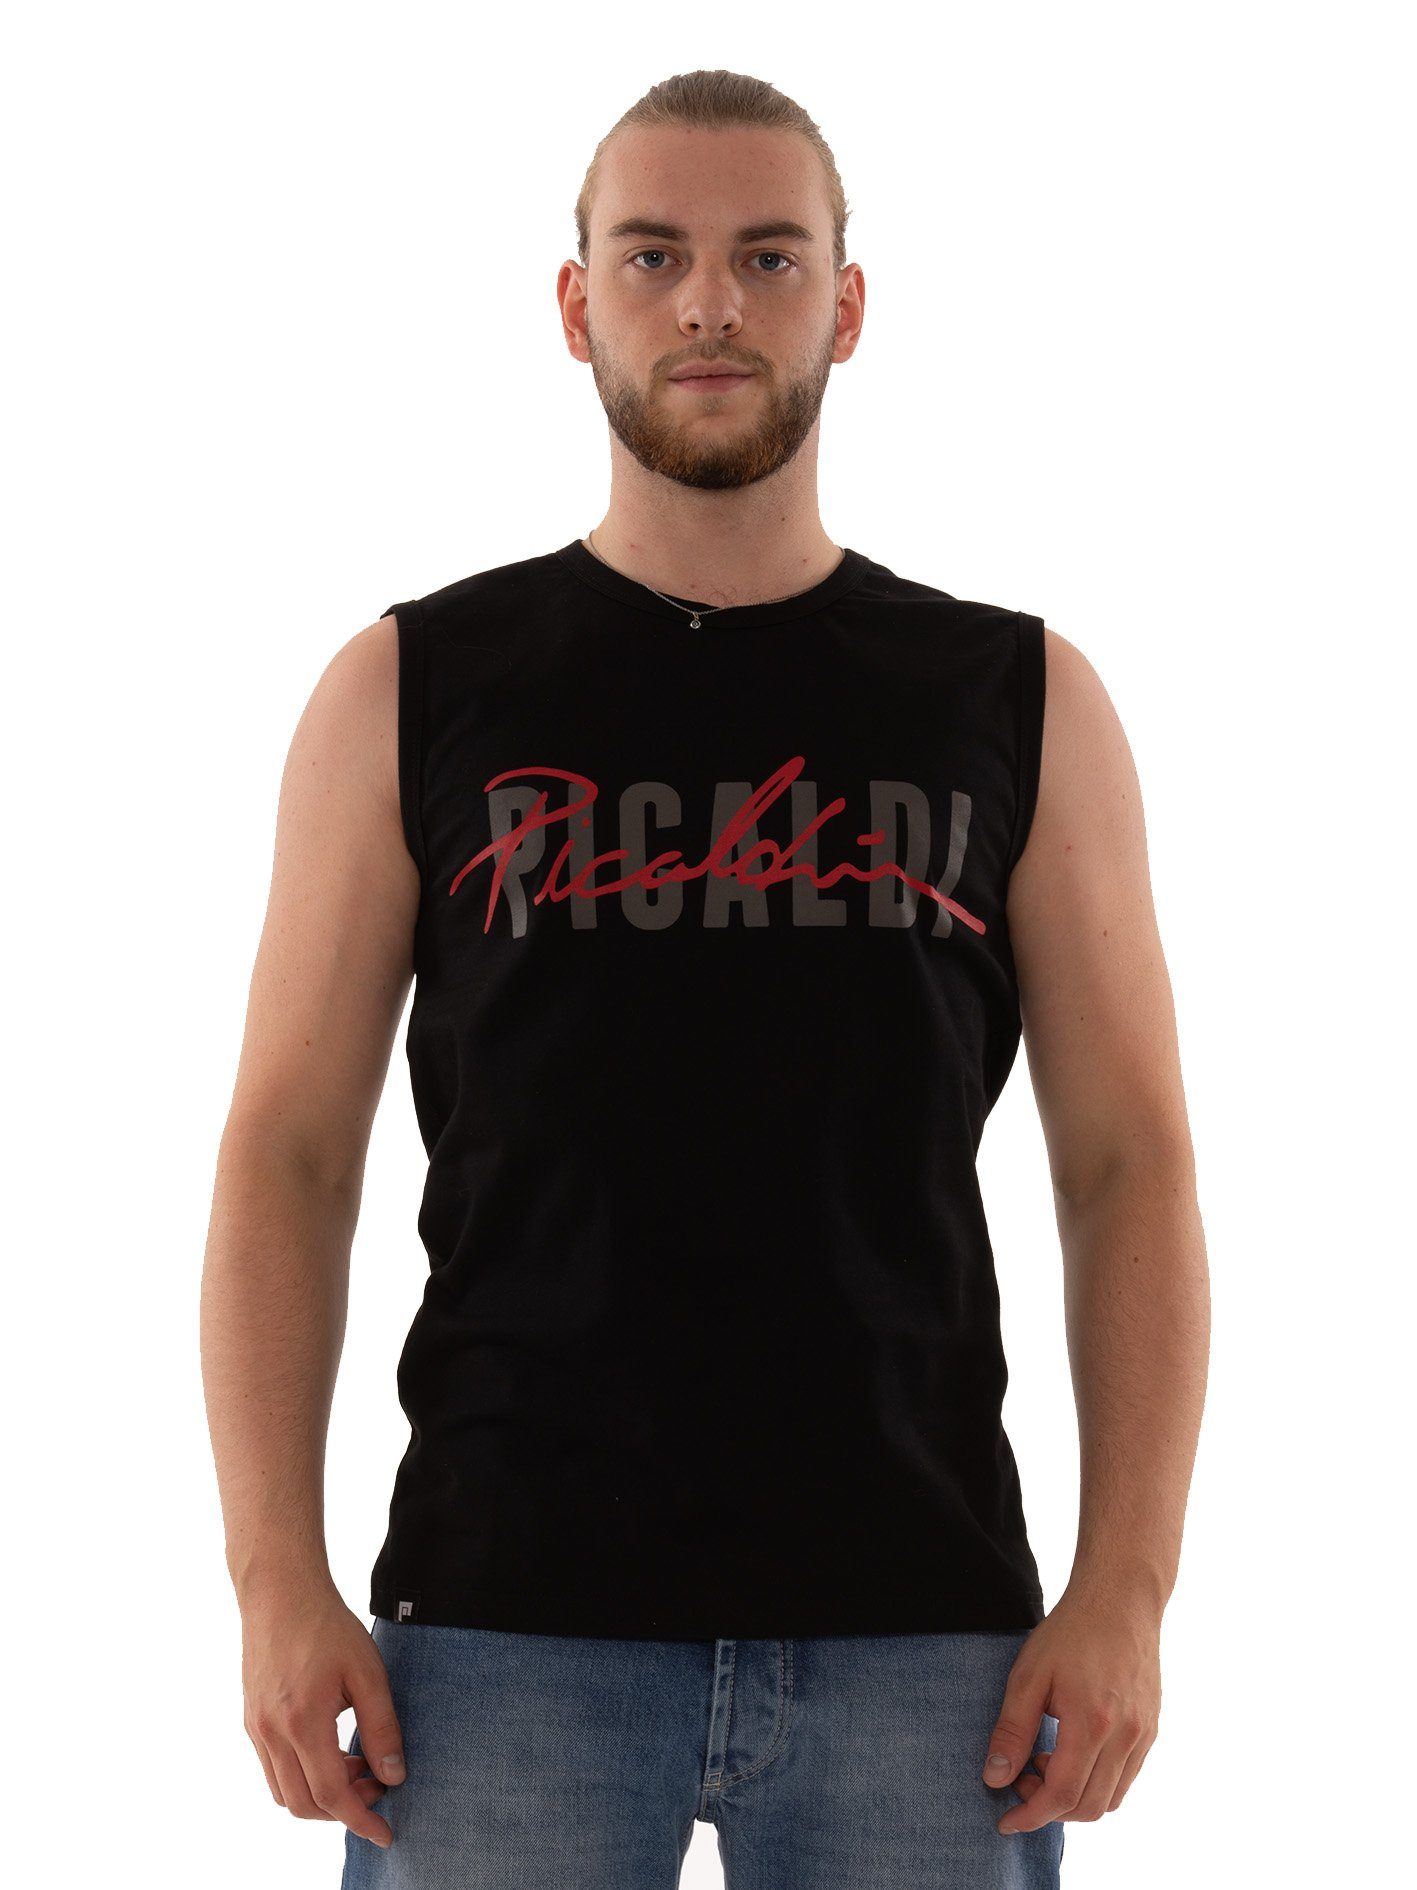 PICALDI Jeans Muskelshirt Collection Print, Rundhalsausschnit Black